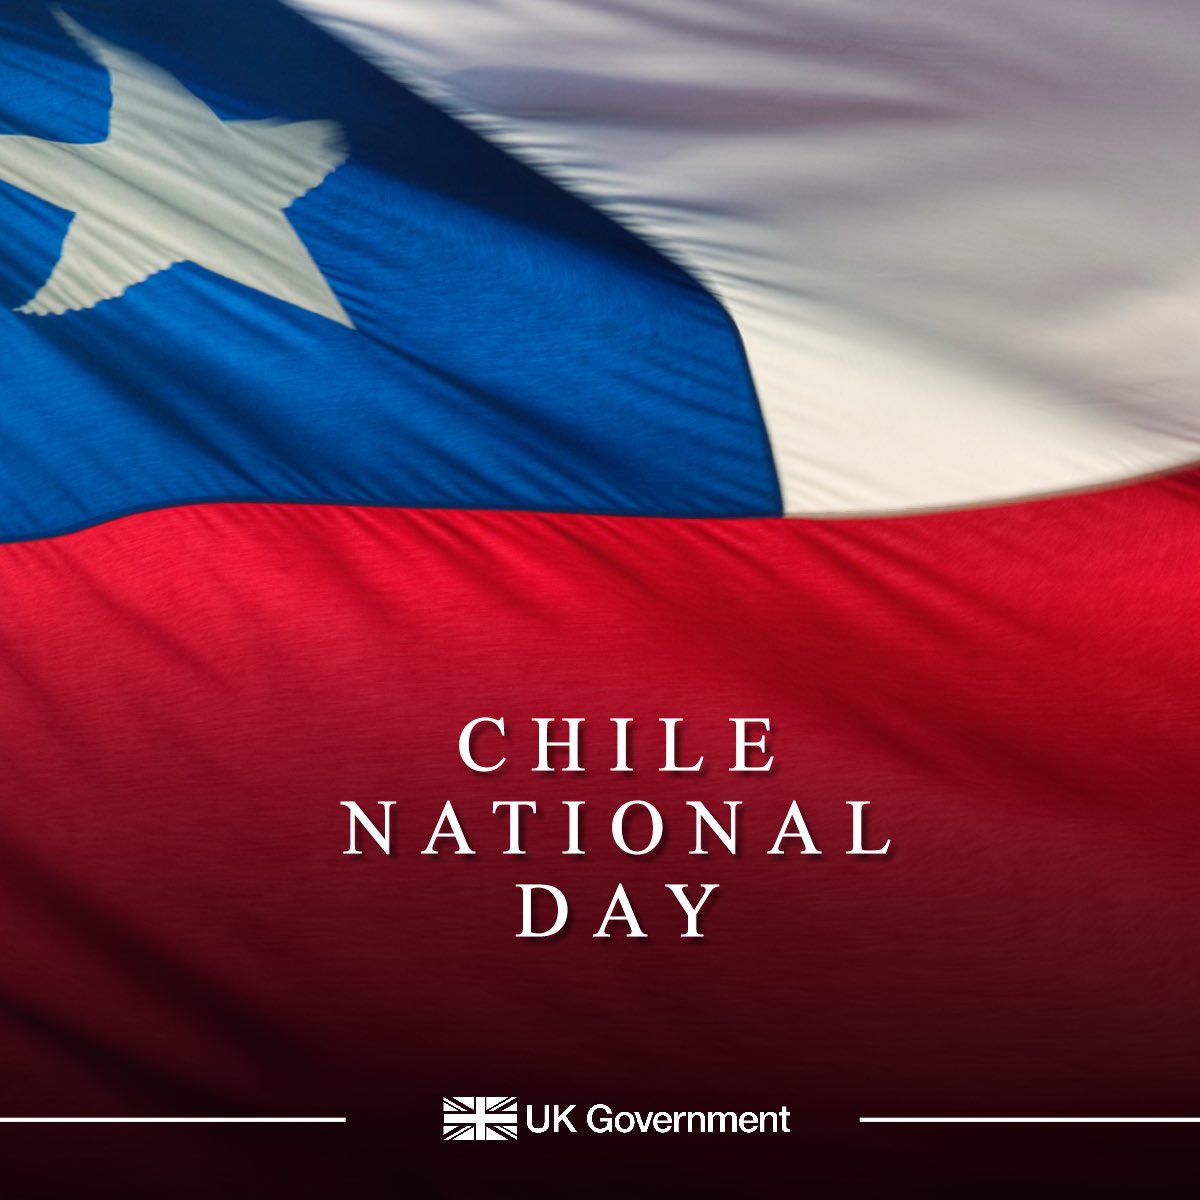 ¡Felices fiestas patrias Chile!   📣 From promoting free trade in the CPTPP - the Trans-Pacific trade bloc that we joined this year - to standing up for human rights, our 200-year friendship has never been stronger.   Happy Independence Day!   🇨🇱🤝🇬🇧